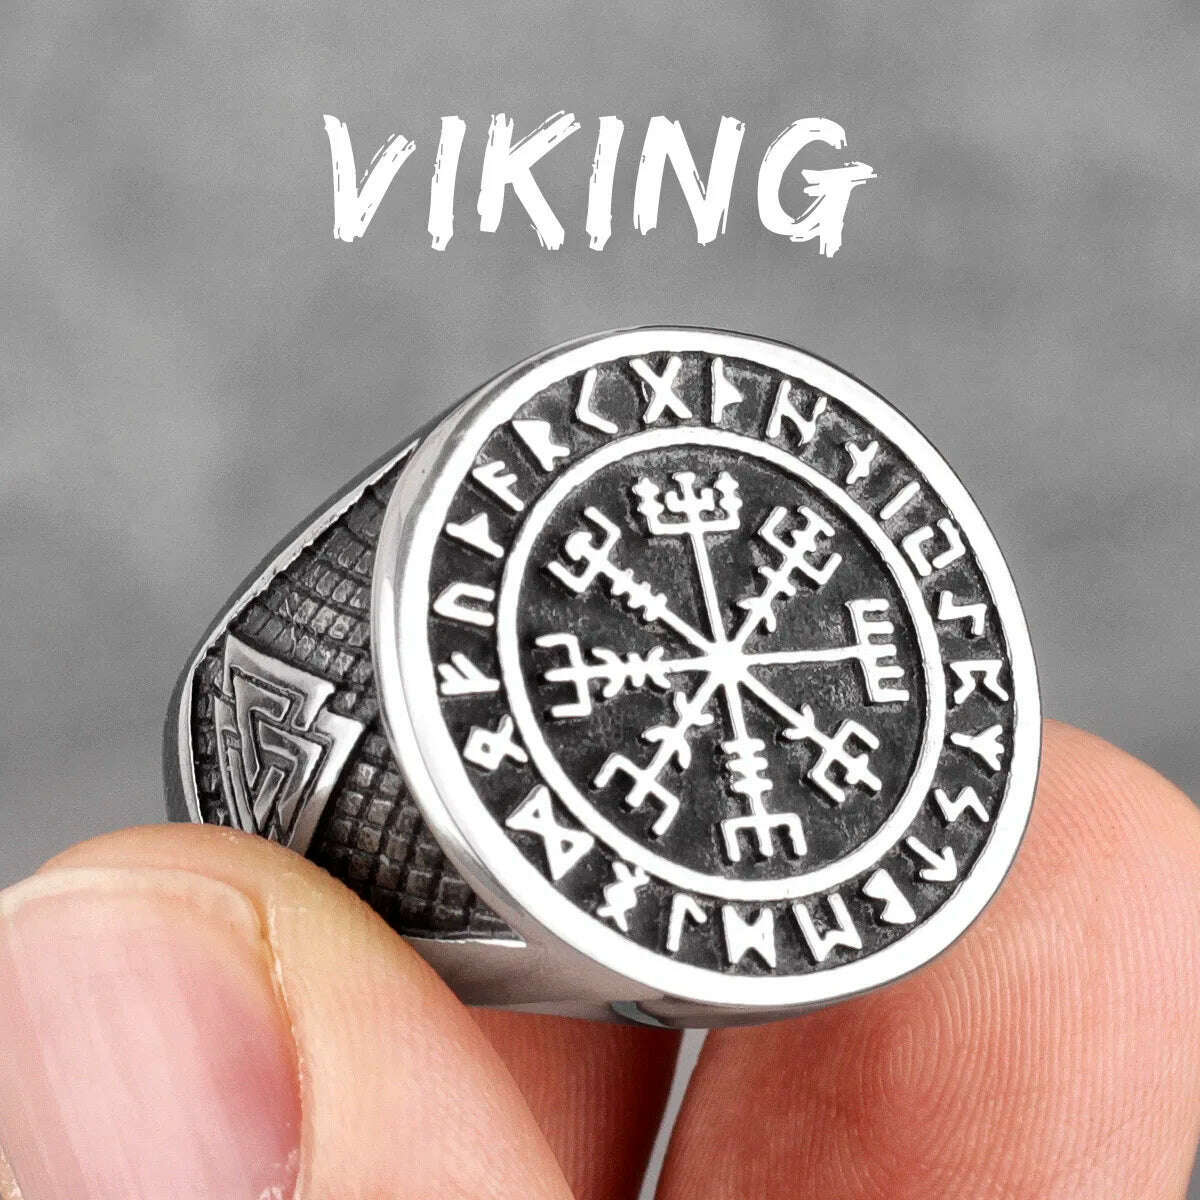 KIMLUD, Myth Odin Triangle Symbol Viking Stainless Steel Mens Rings Vintage Charm for Male Boyfriend Jewelry Creativity Gift Wholesale, 9 / R674-Viking, KIMLUD Women's Clothes